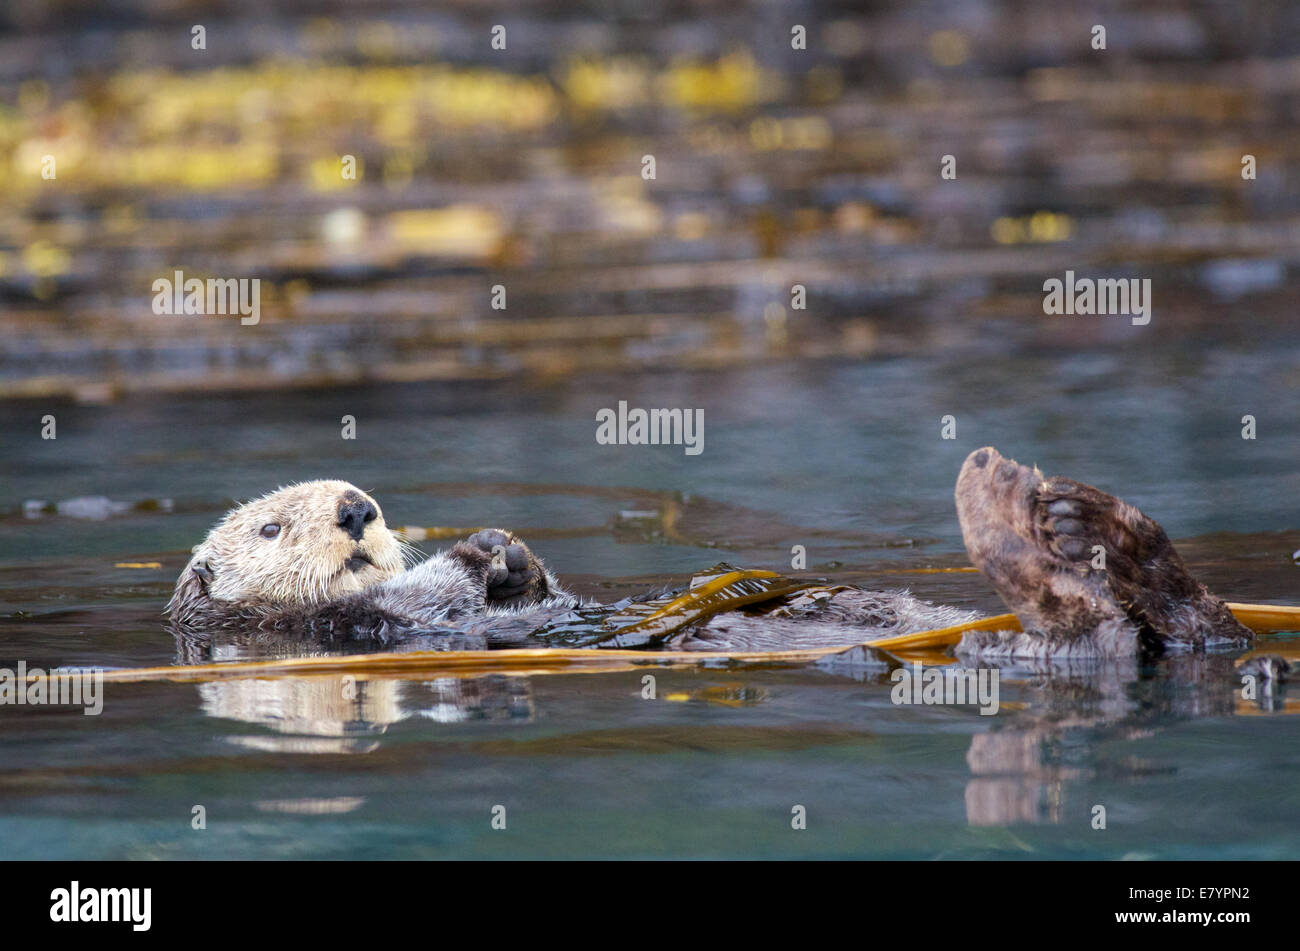 A Northern Sea Otter (Enhydra lutris kenyonii) floating in a kelp bed in the Inian Islands, Tongass National Forest, Alaska. Stock Photo